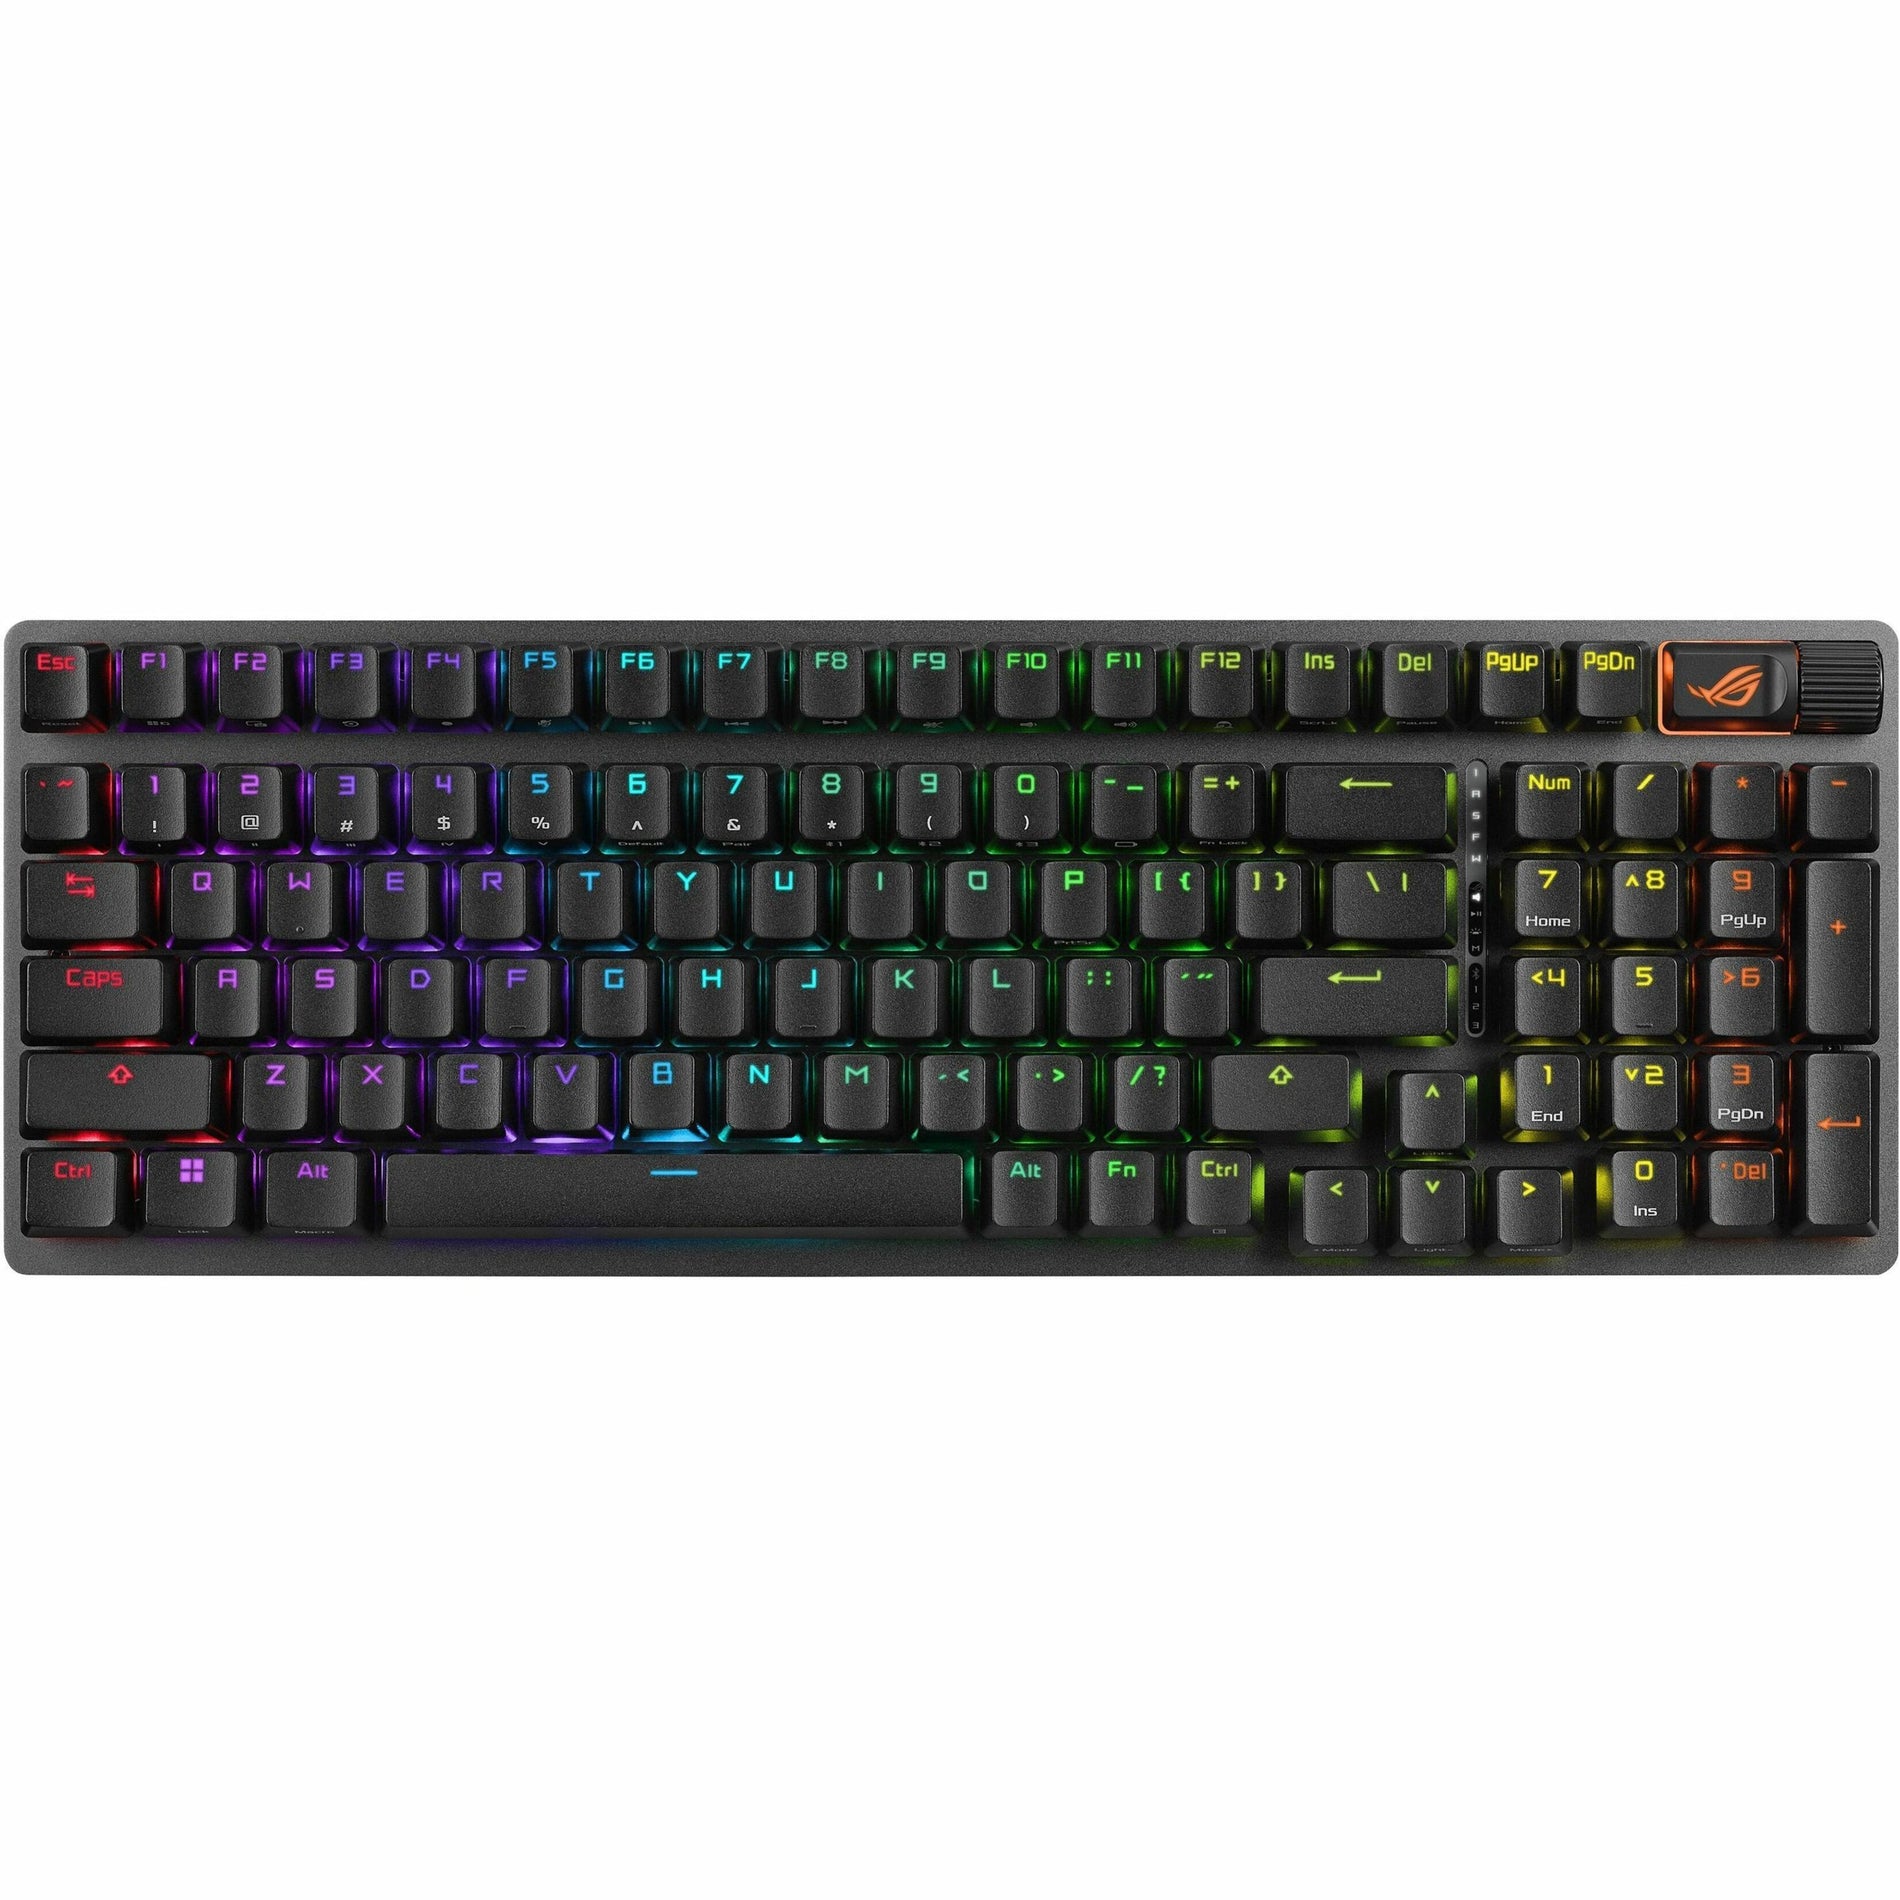 ASUS ROG Strix Scope II 96 Wireless Gaming Keyboard, Tri-Mode Connection, Dampening Foam & Switch-Dampening Pads, Hot-Swappable Pre-lubed ROG NX Snow Switches, PBT Keycaps, RGB-Black (X901STRIXSCOPEII96WLNX)